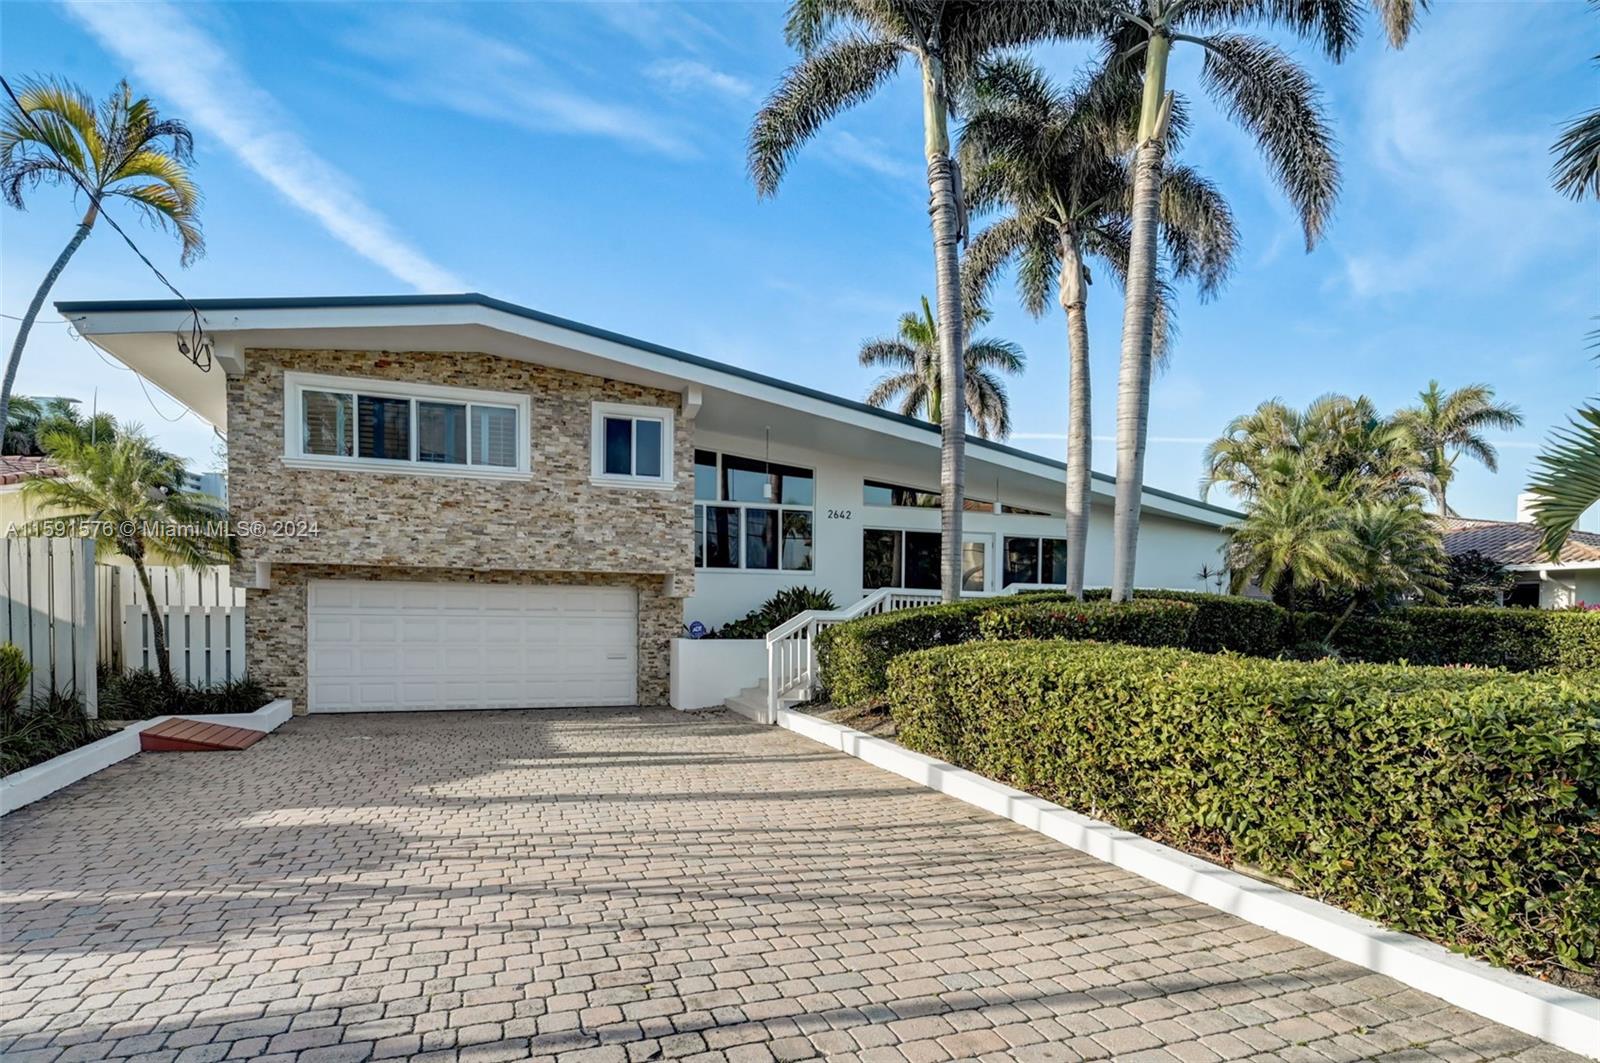 Newly updated Mid-century modern waterfront home in Fort Lauderdale Harbor Beach extension east of A1A!! Short walk to the beach,Optional HOA. 80' dock & boat lift! New updates include kitchen cabinets, quartz countertops, new flooring throughout, updated bathrooms, IMPACT WINDOWS & DOORS & NEW METAL ROOF! Live the life of fun,luxury and convenience in the most Exclusive part of Fort Lauderdale Beach